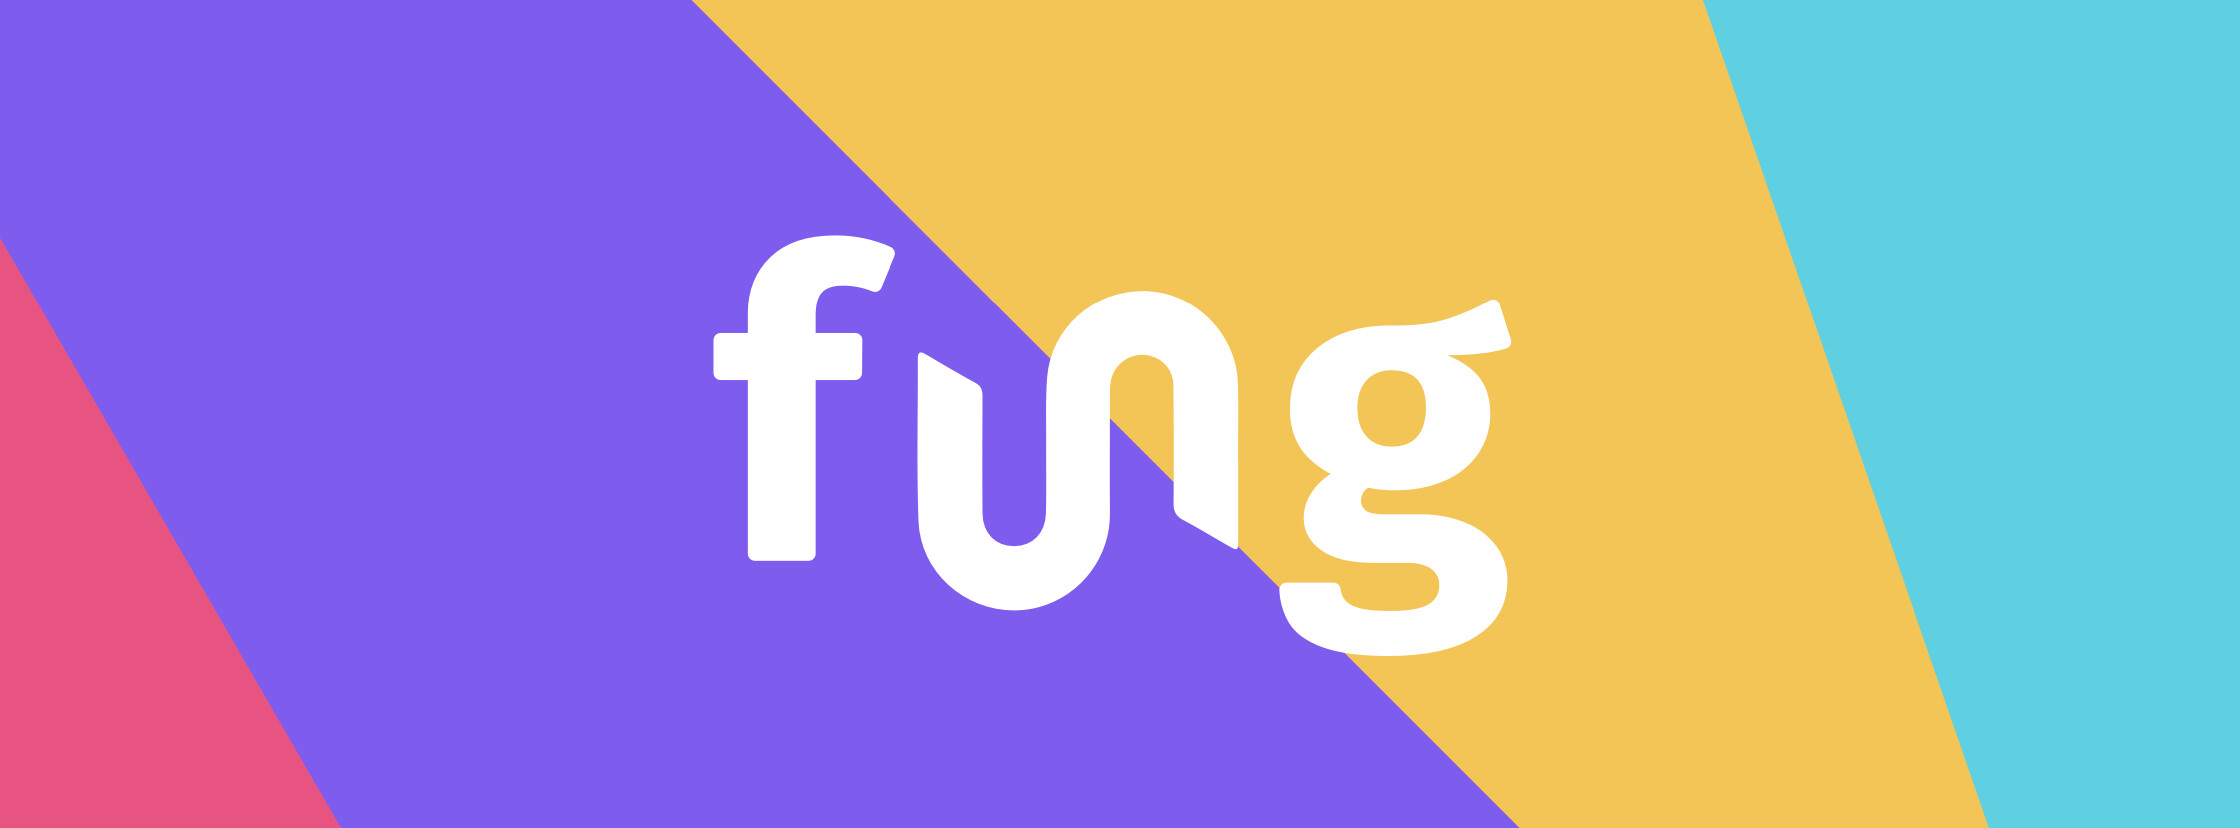 Fung Payments | LinkedIn